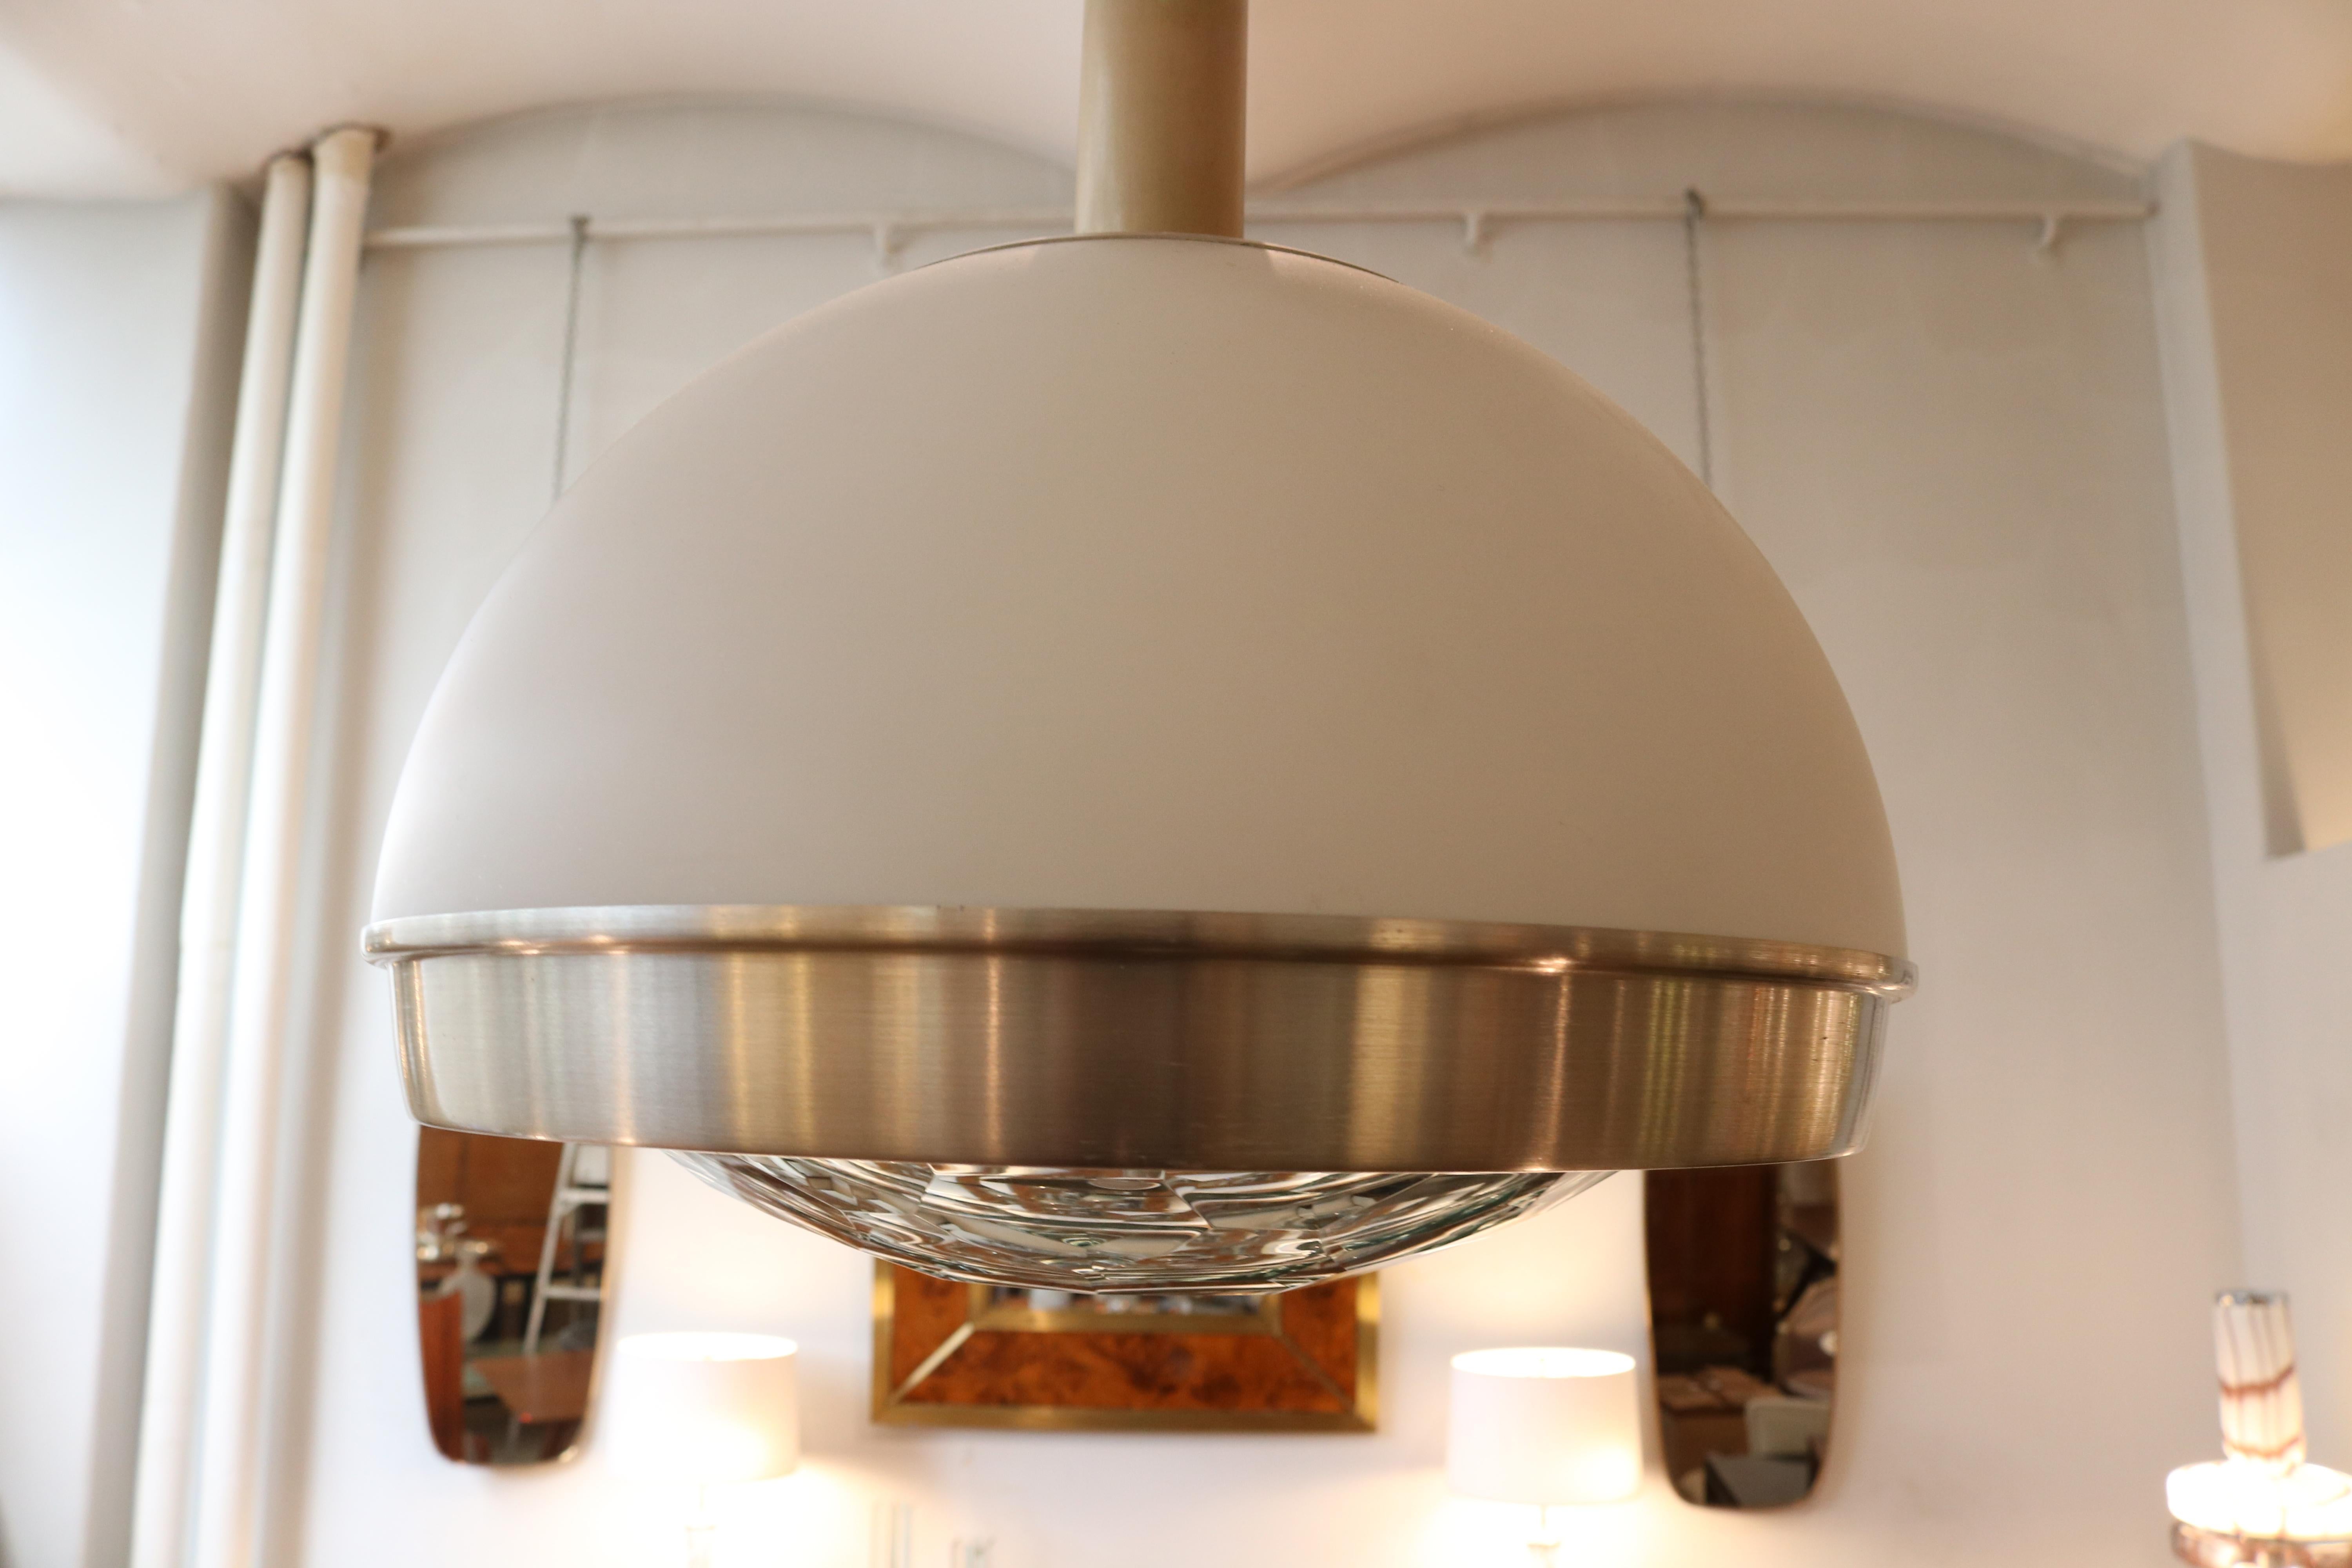 Frosted Pia Guidetti Crippa Modernist Pendant Light for Lumi , Italy 1960's For Sale